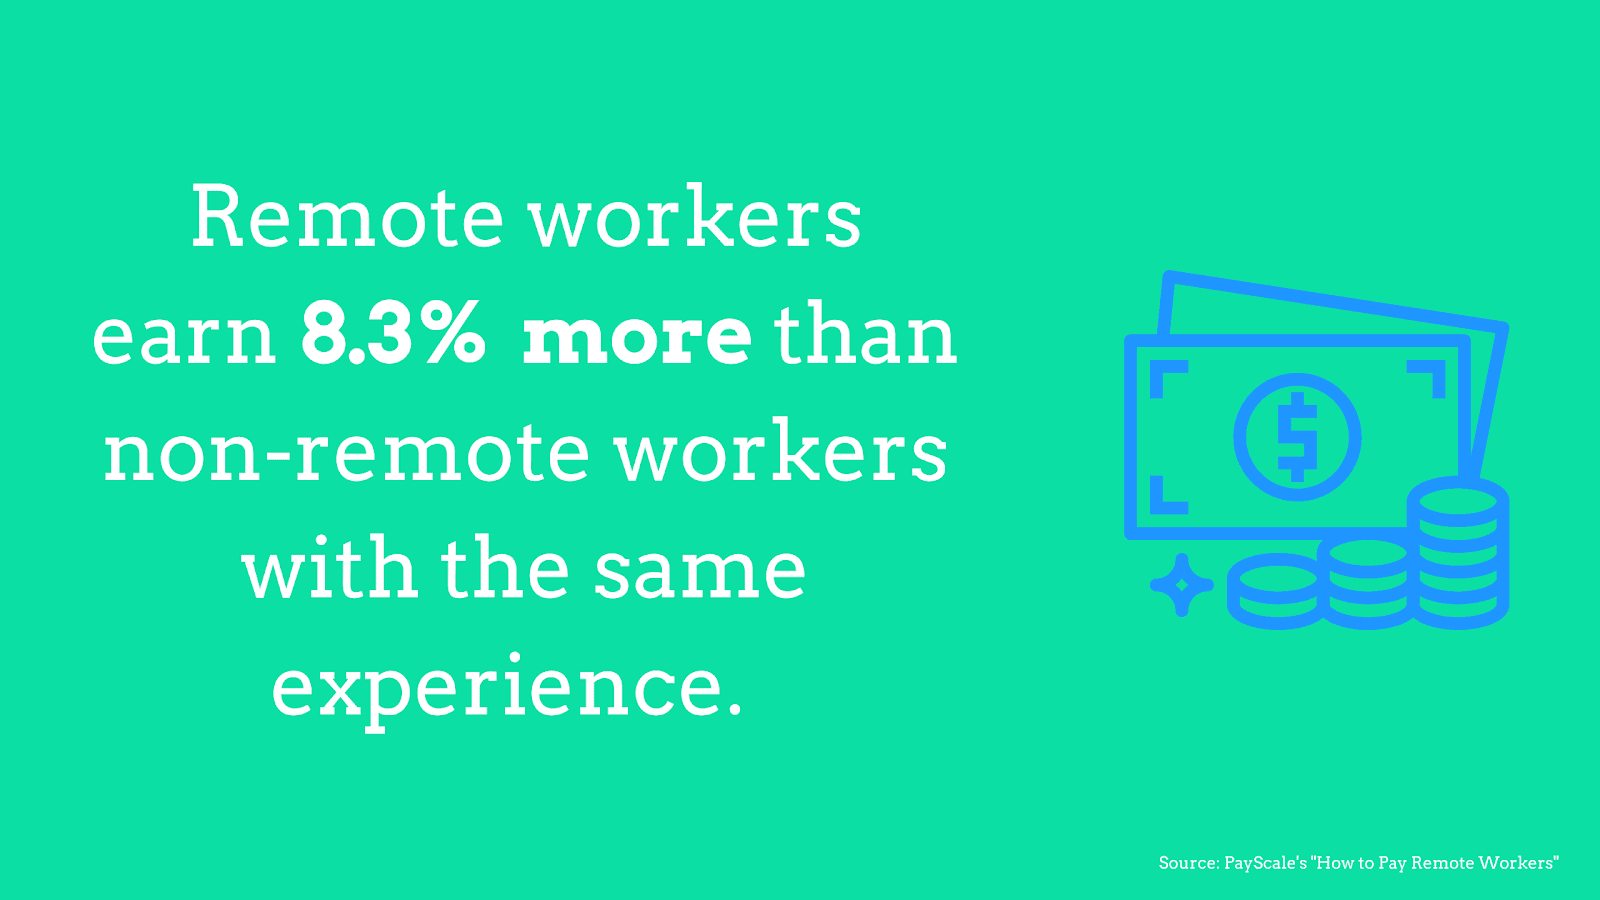 Remote workers earn 8.3% more than non-remote workers